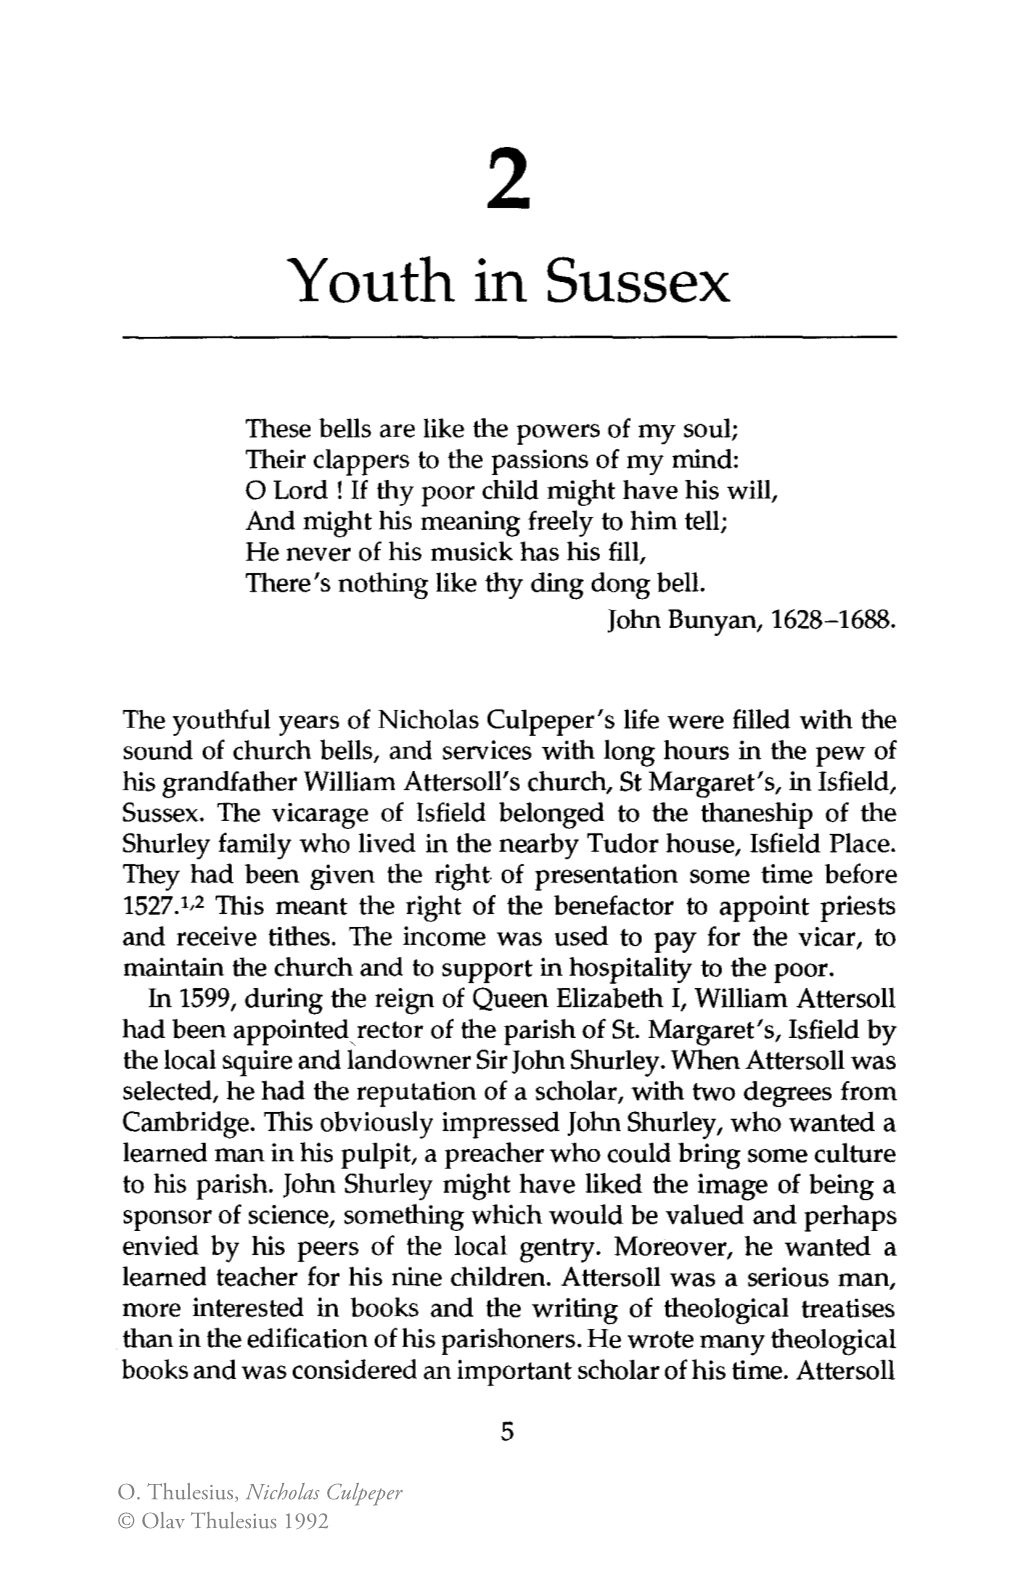 Youth in Sussex